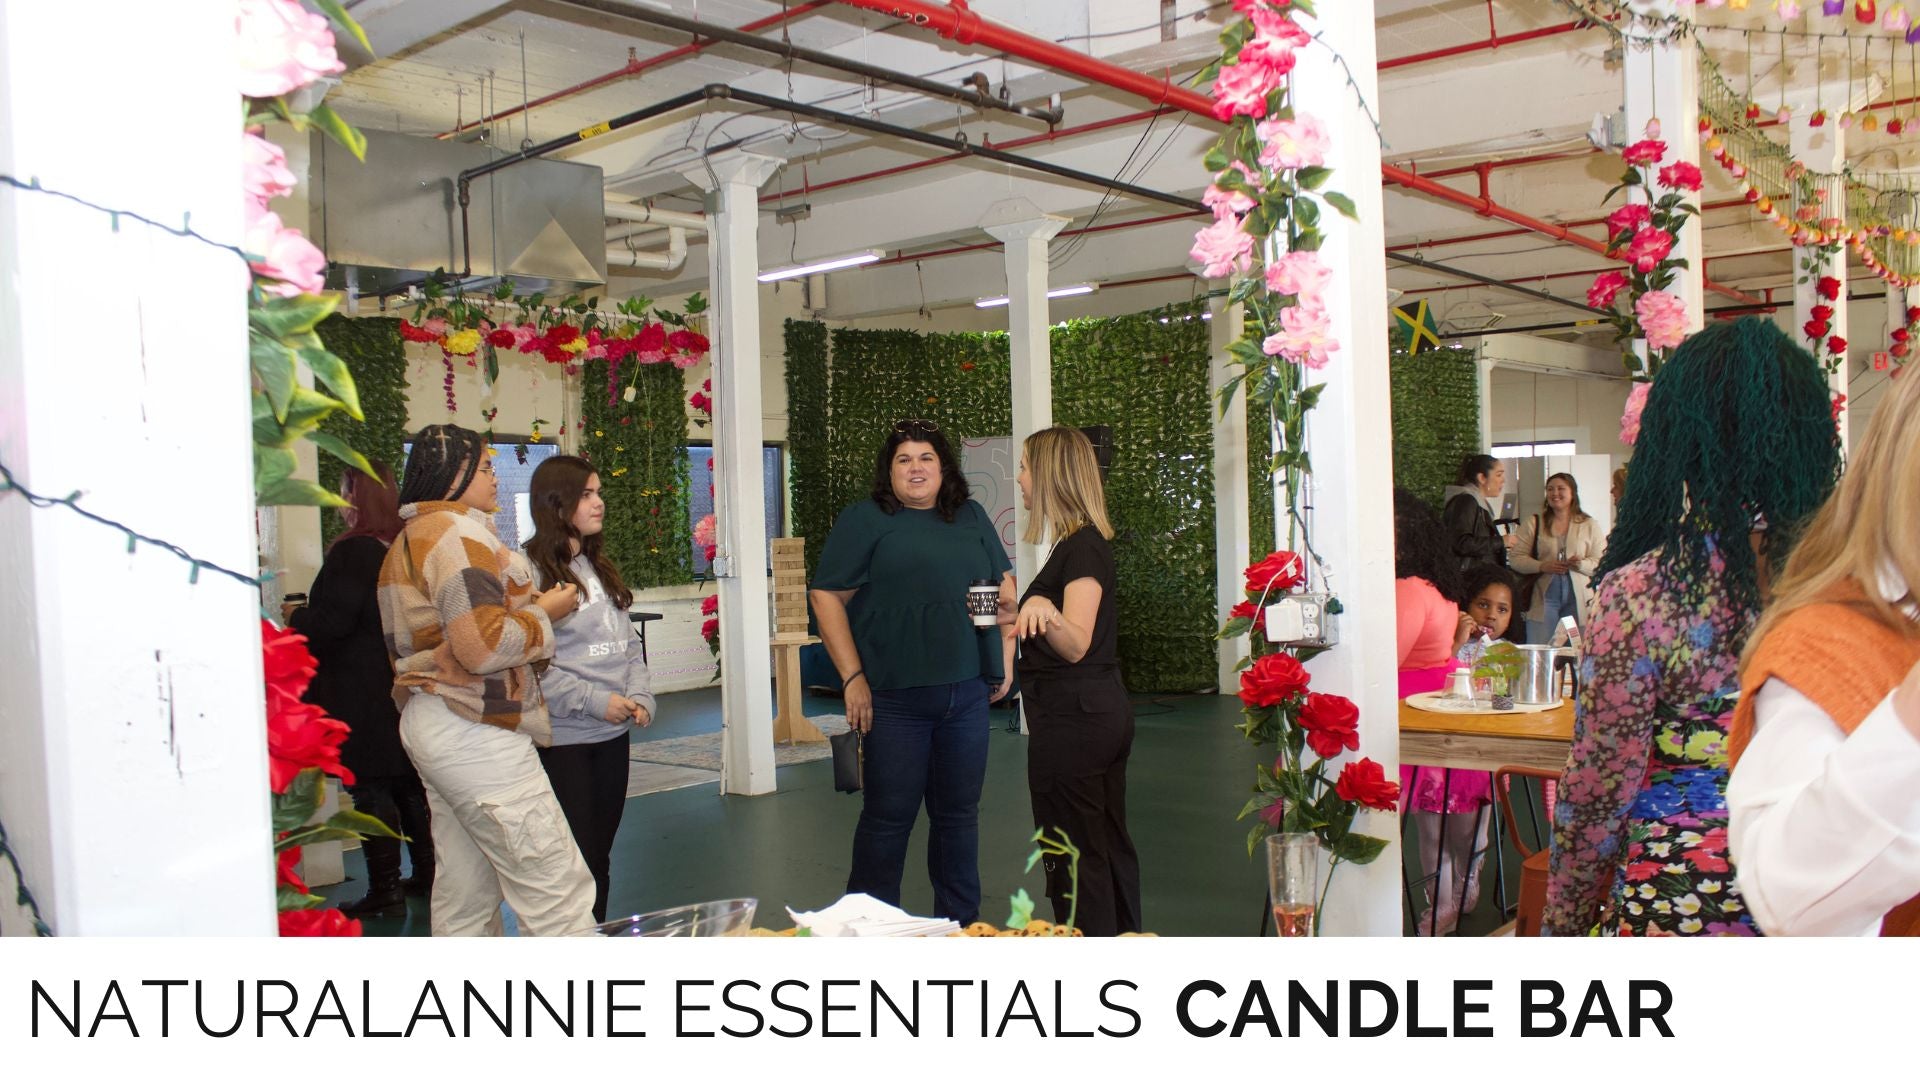 naturalannie essentials candle bar and event space in bridgeport connecticut